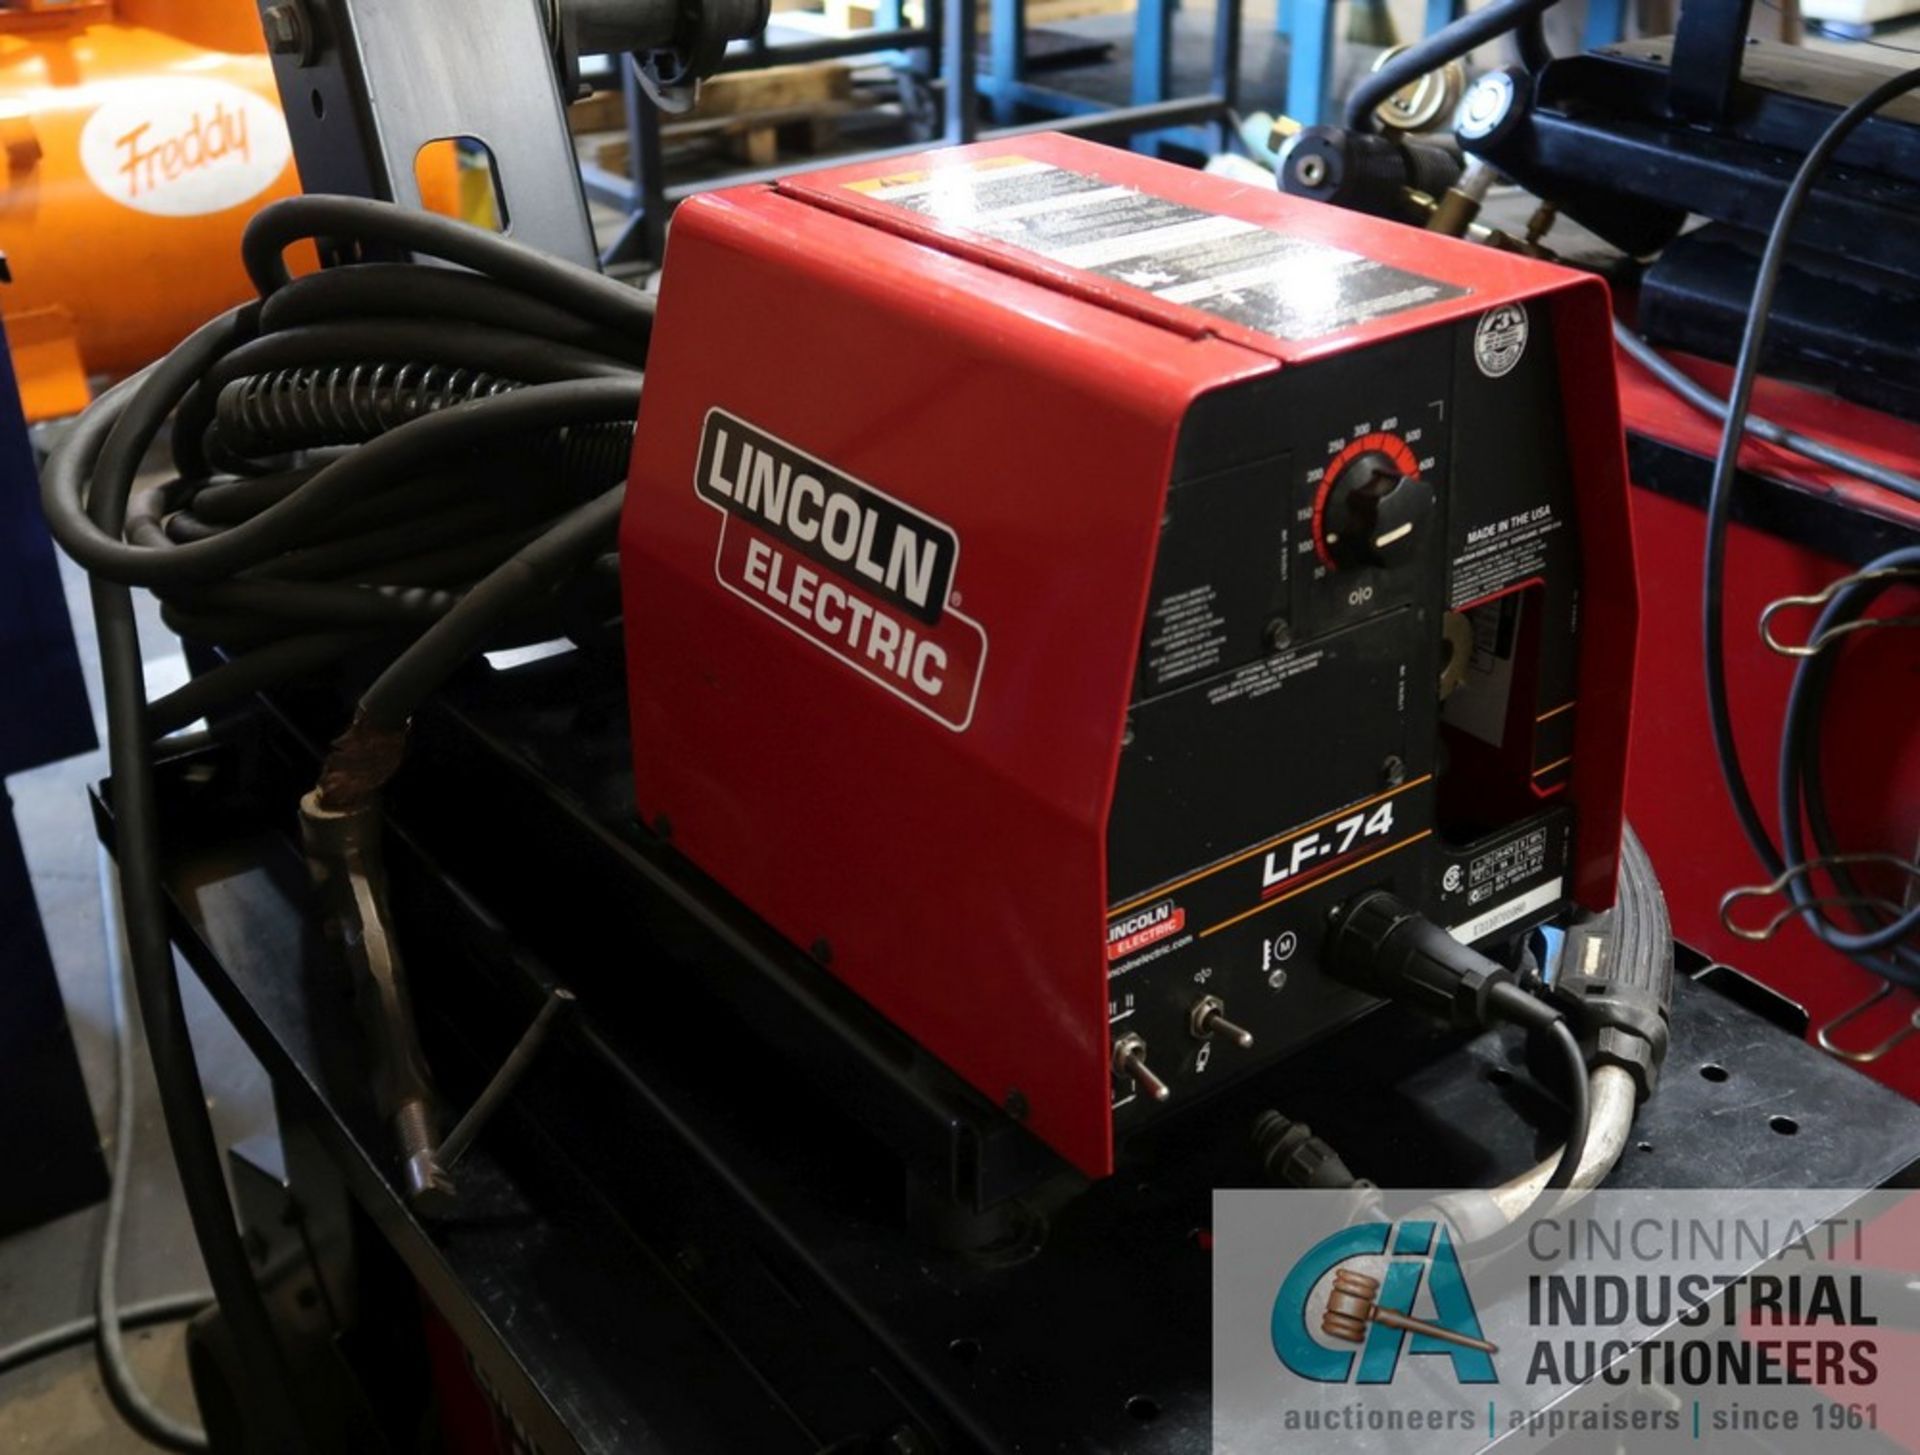 450 AMP LINCOLN ELECTRIC FLEXTEC 450 WELDING POWER SOURCE S/N U110613975 WITH LINCOLN ELECTRIC MODEL - Image 6 of 8